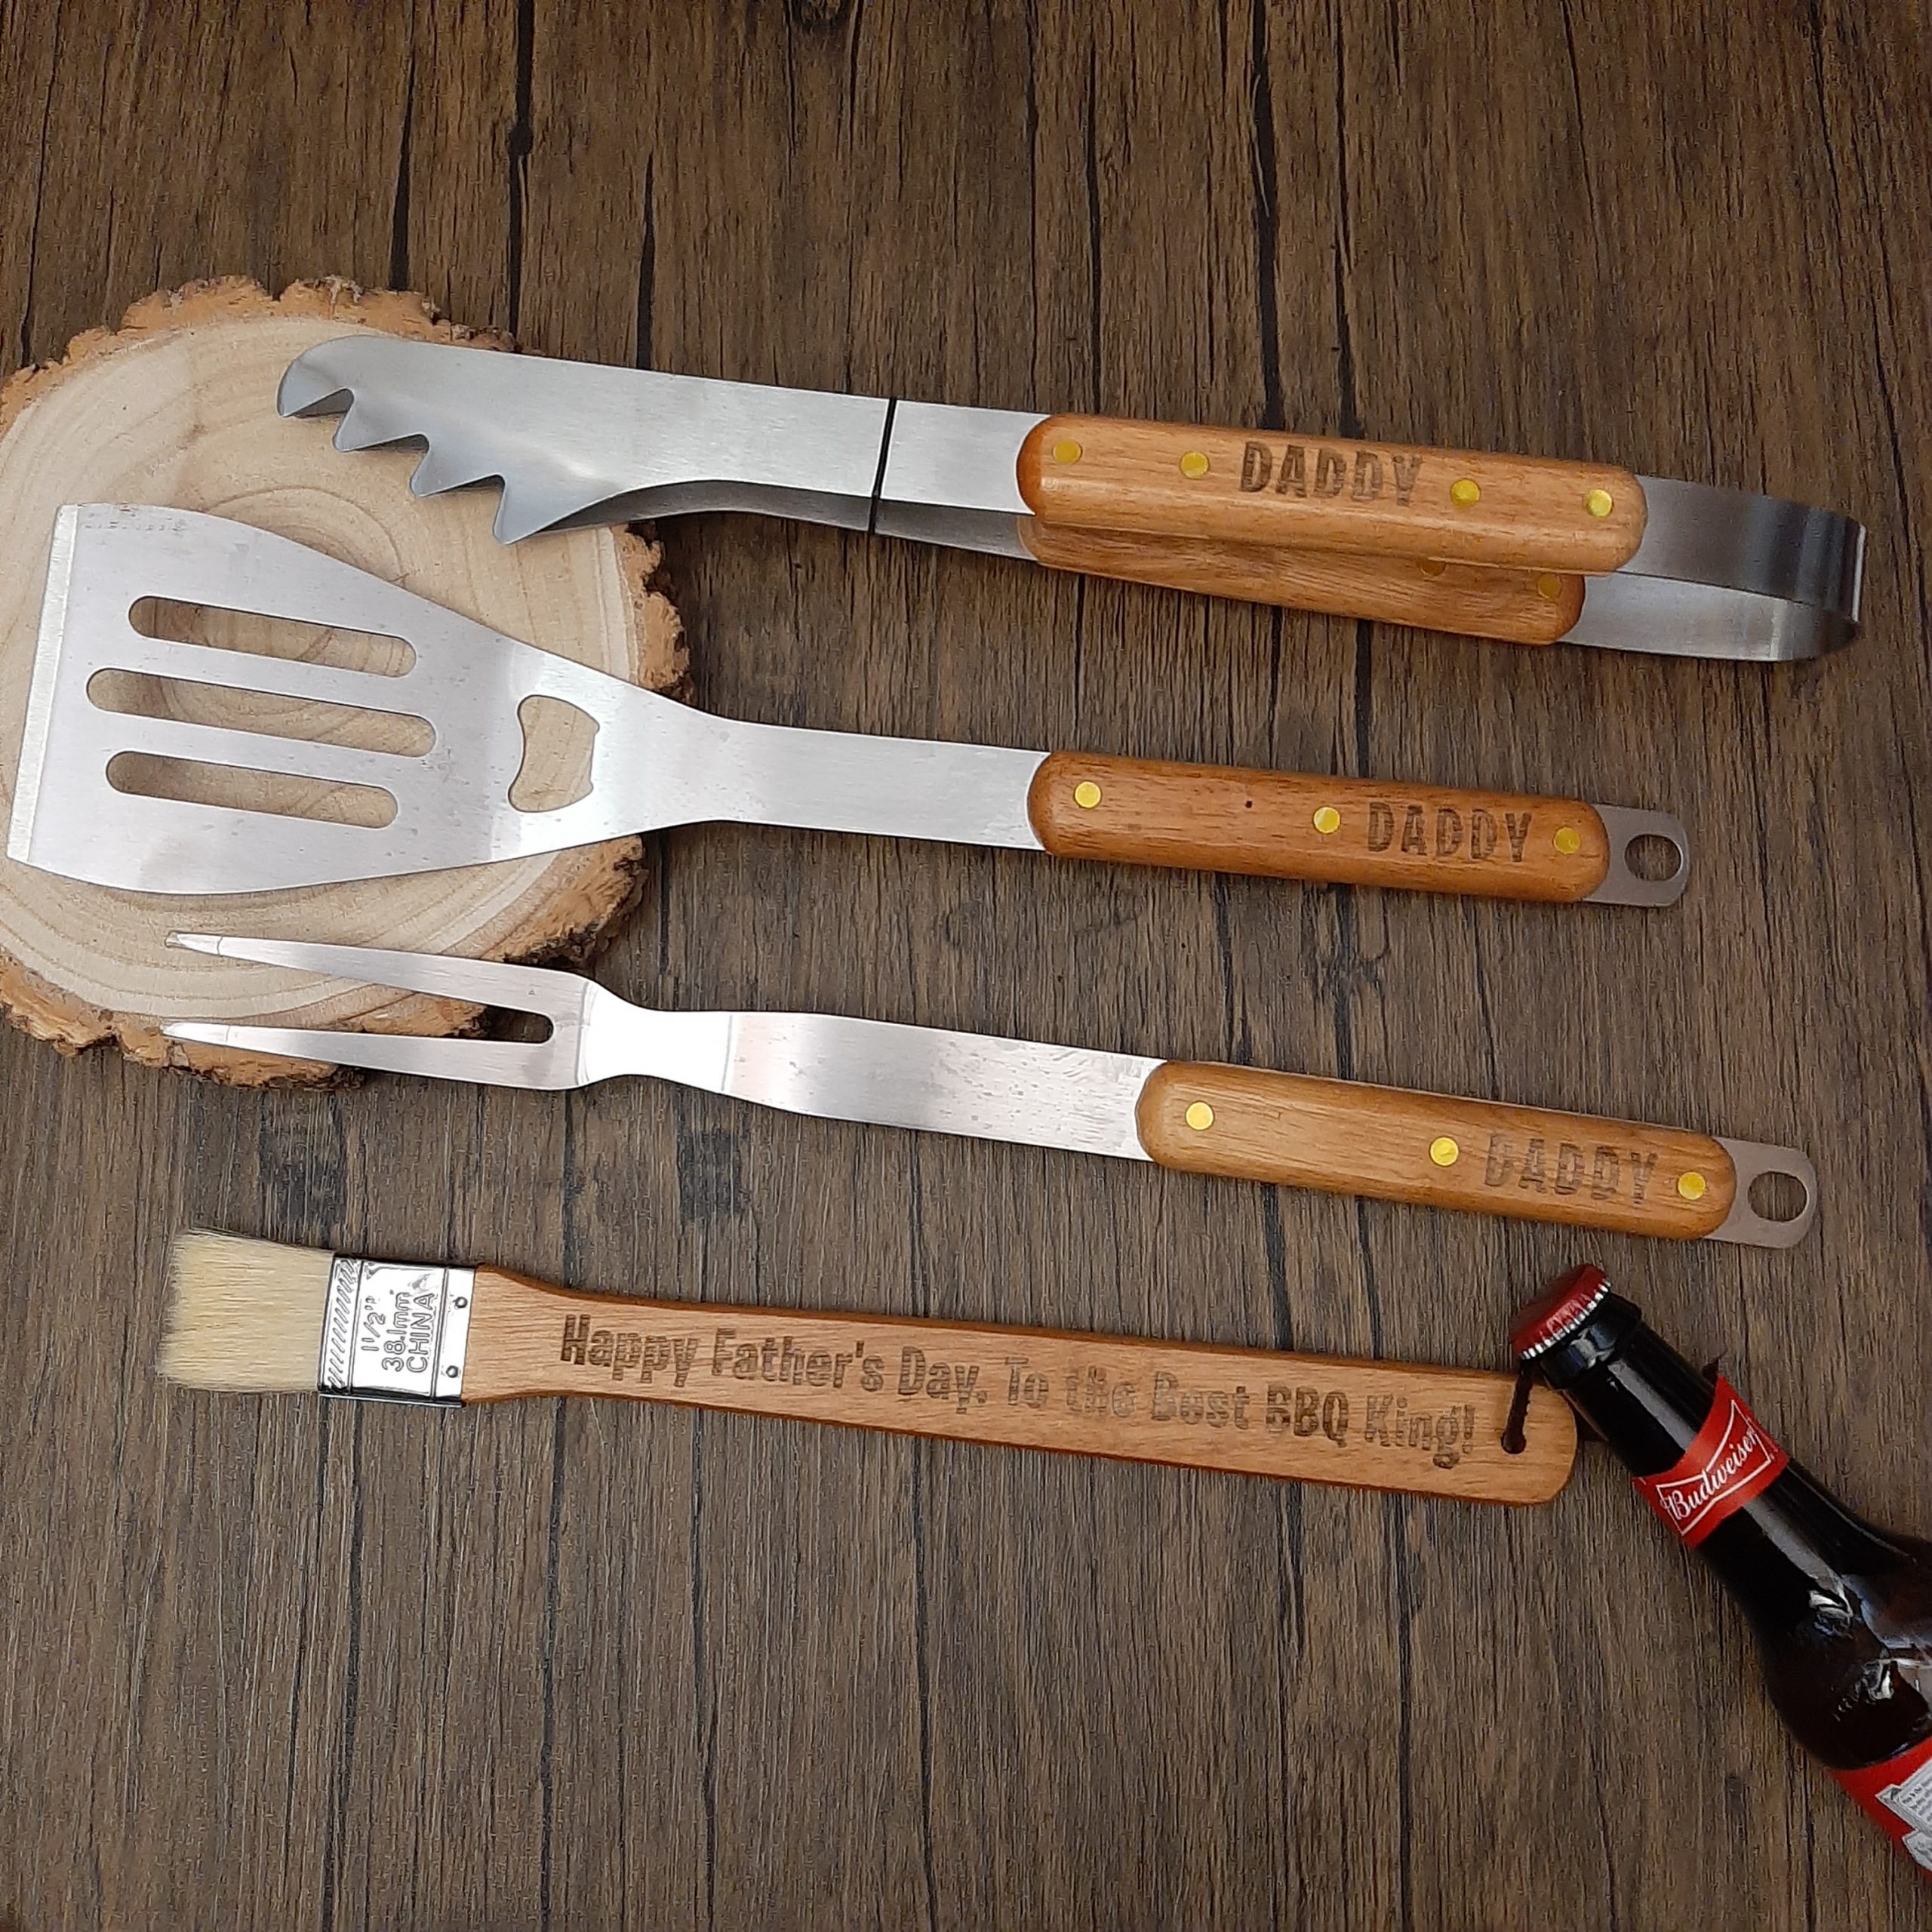 bbq utensil tool kit with wrapped carrier with personalised handles on display. engraved names